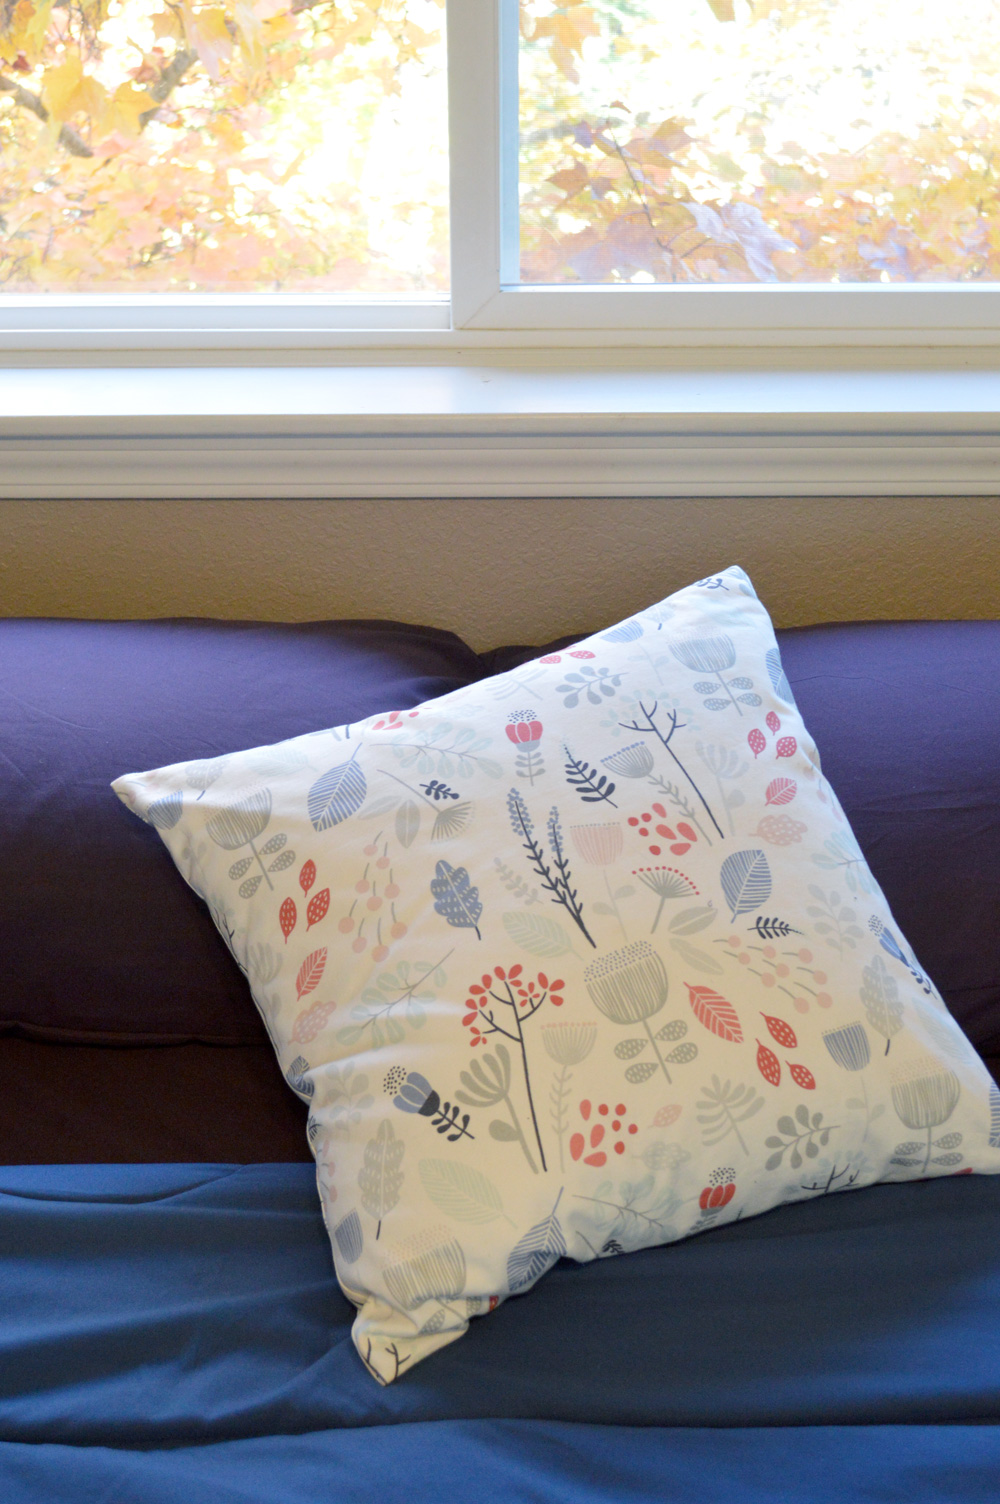 Minted printed throw pillow